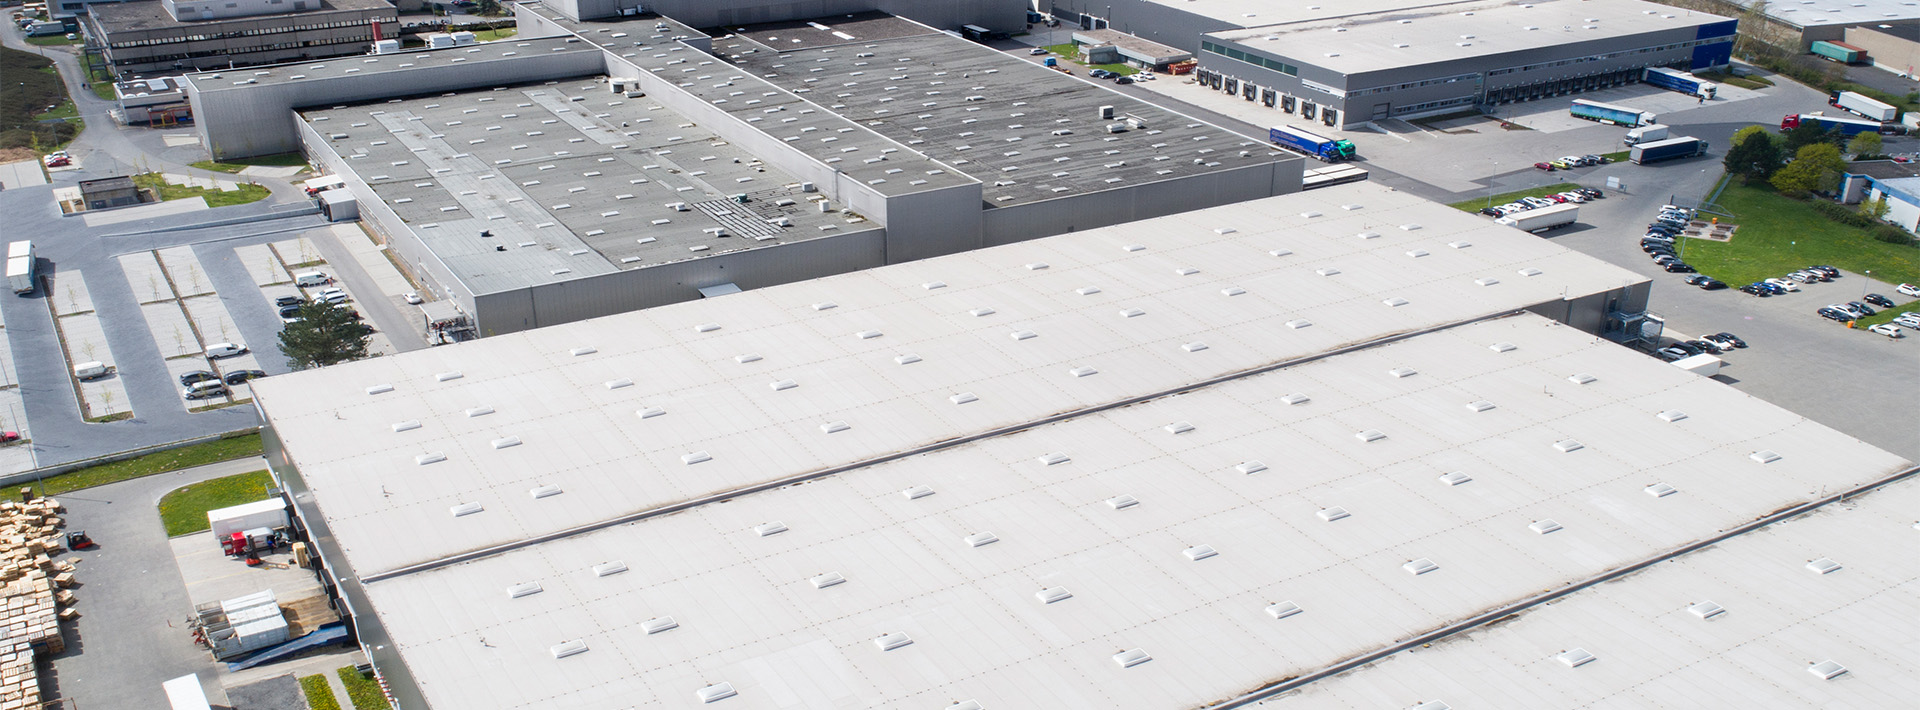 Flat roofs of industrial buildings from a bird's eye view